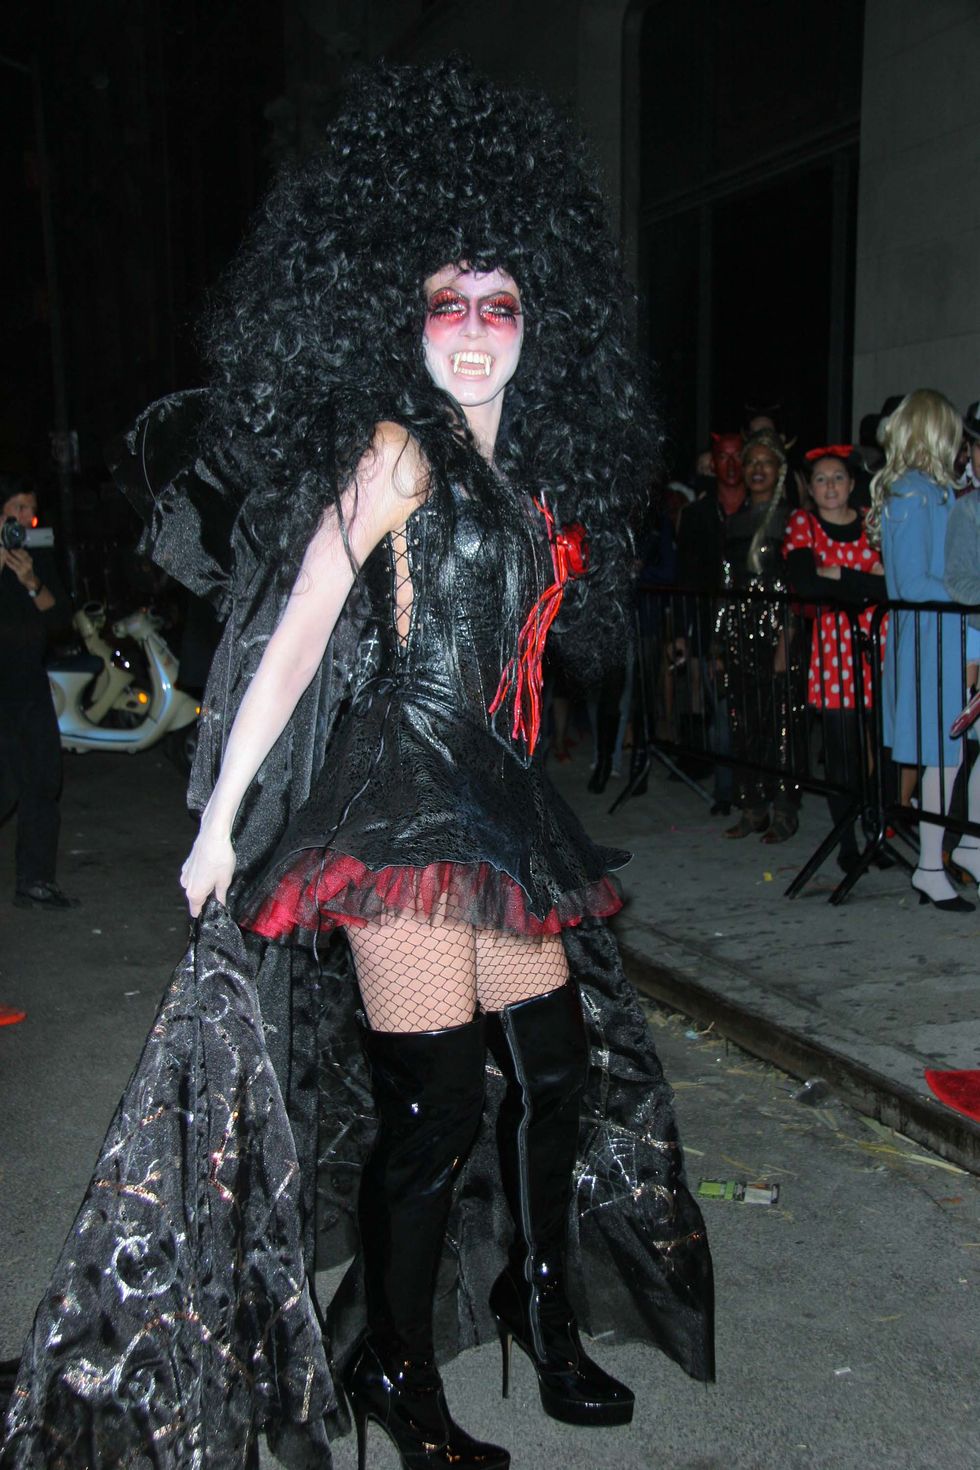 Clothing, Fashion, Costume, Goth subculture, Cosplay, Event, Gothic fashion, Fashion show, Haute couture, Fashion design, 